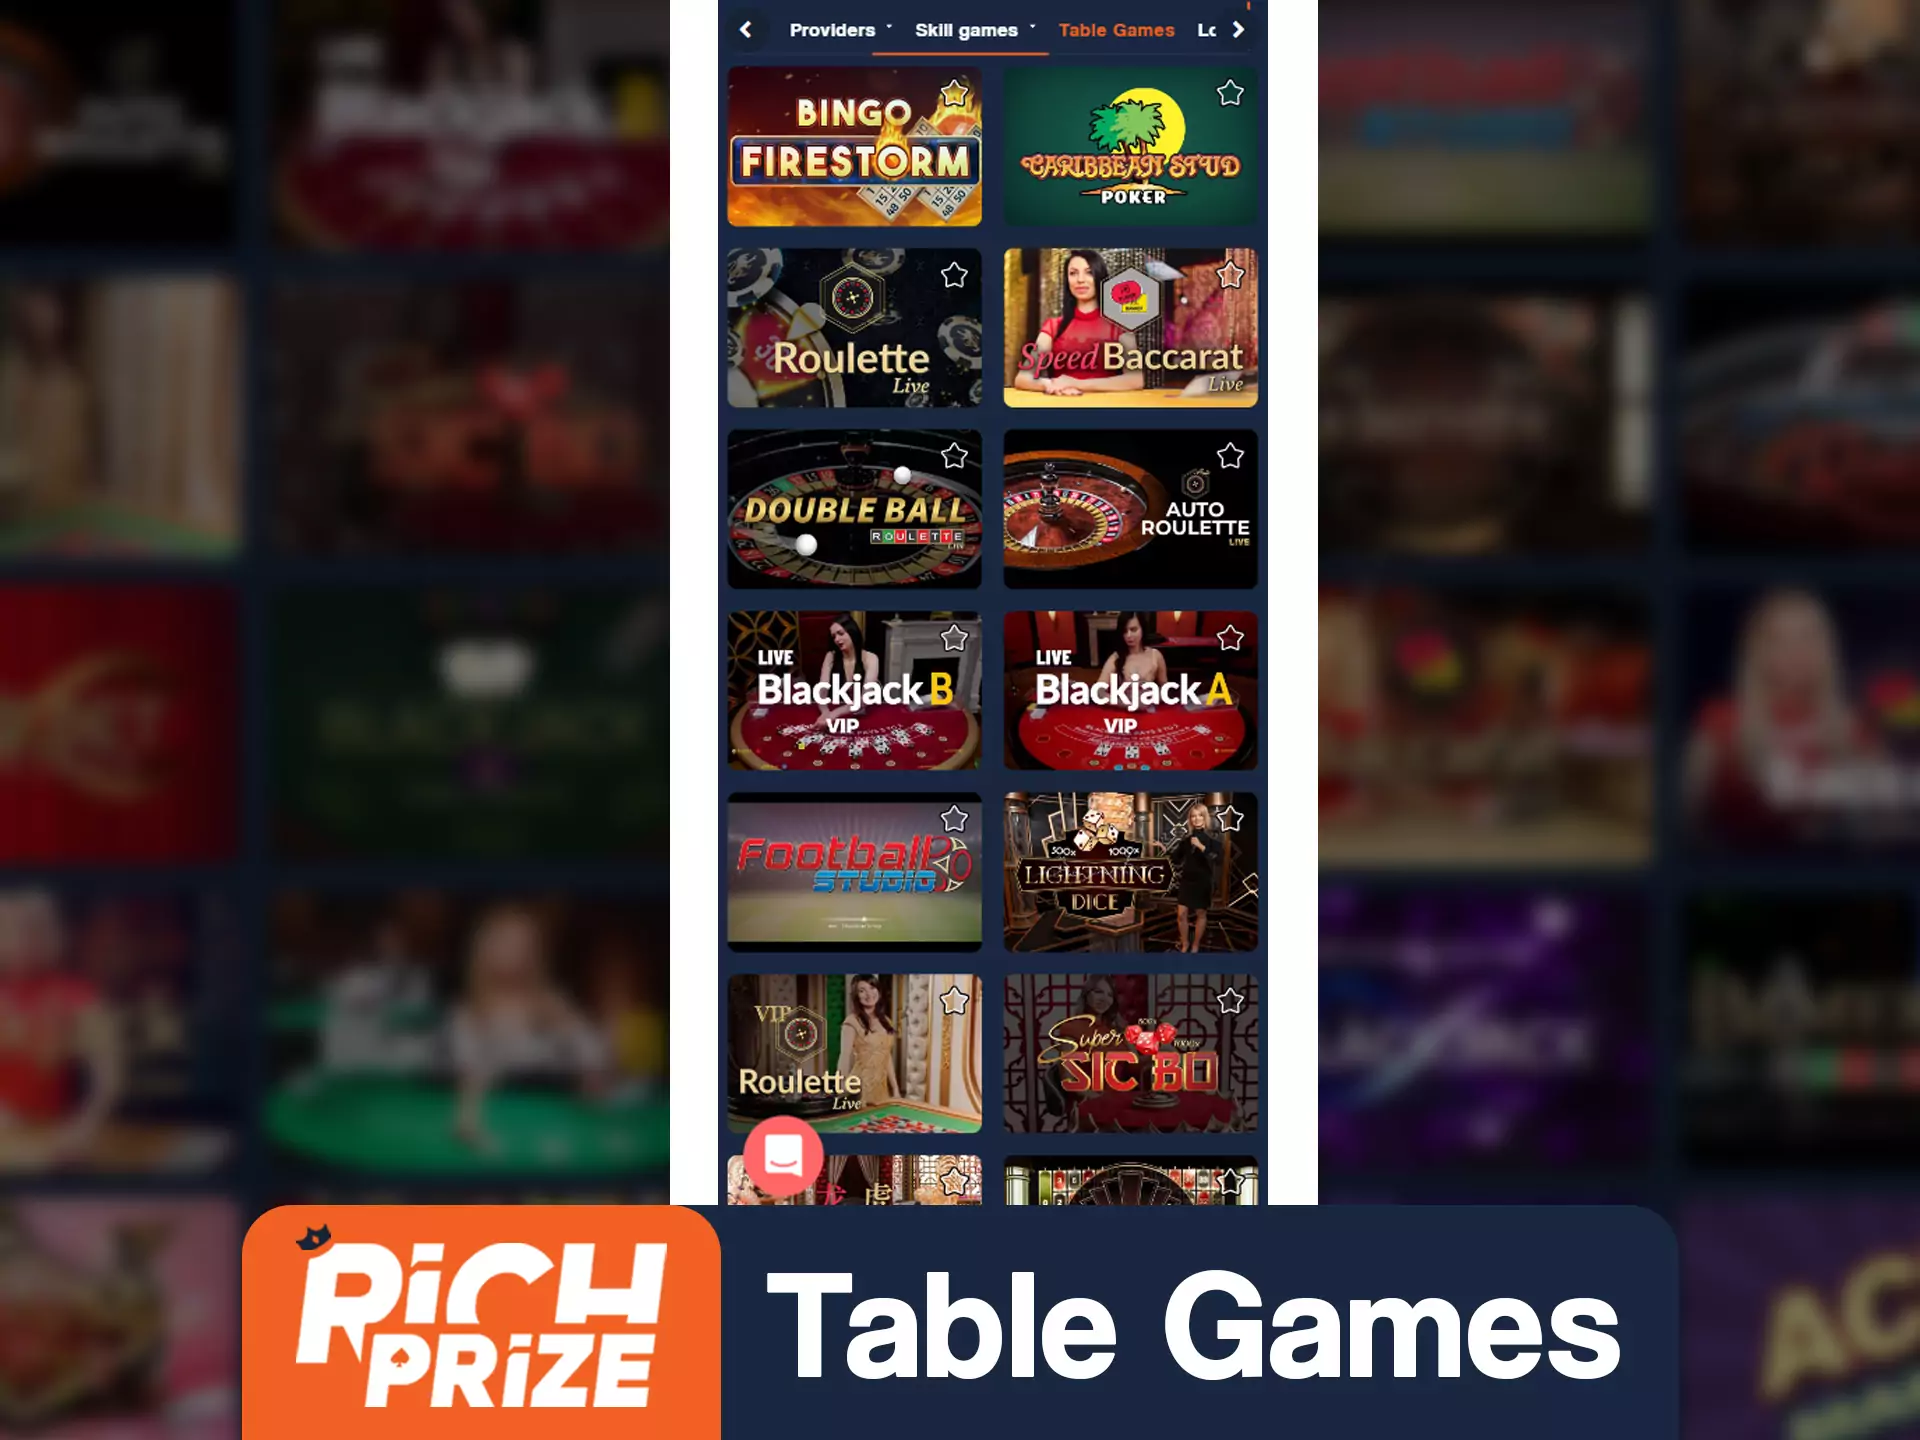 Play serious table games in RichPrize app.